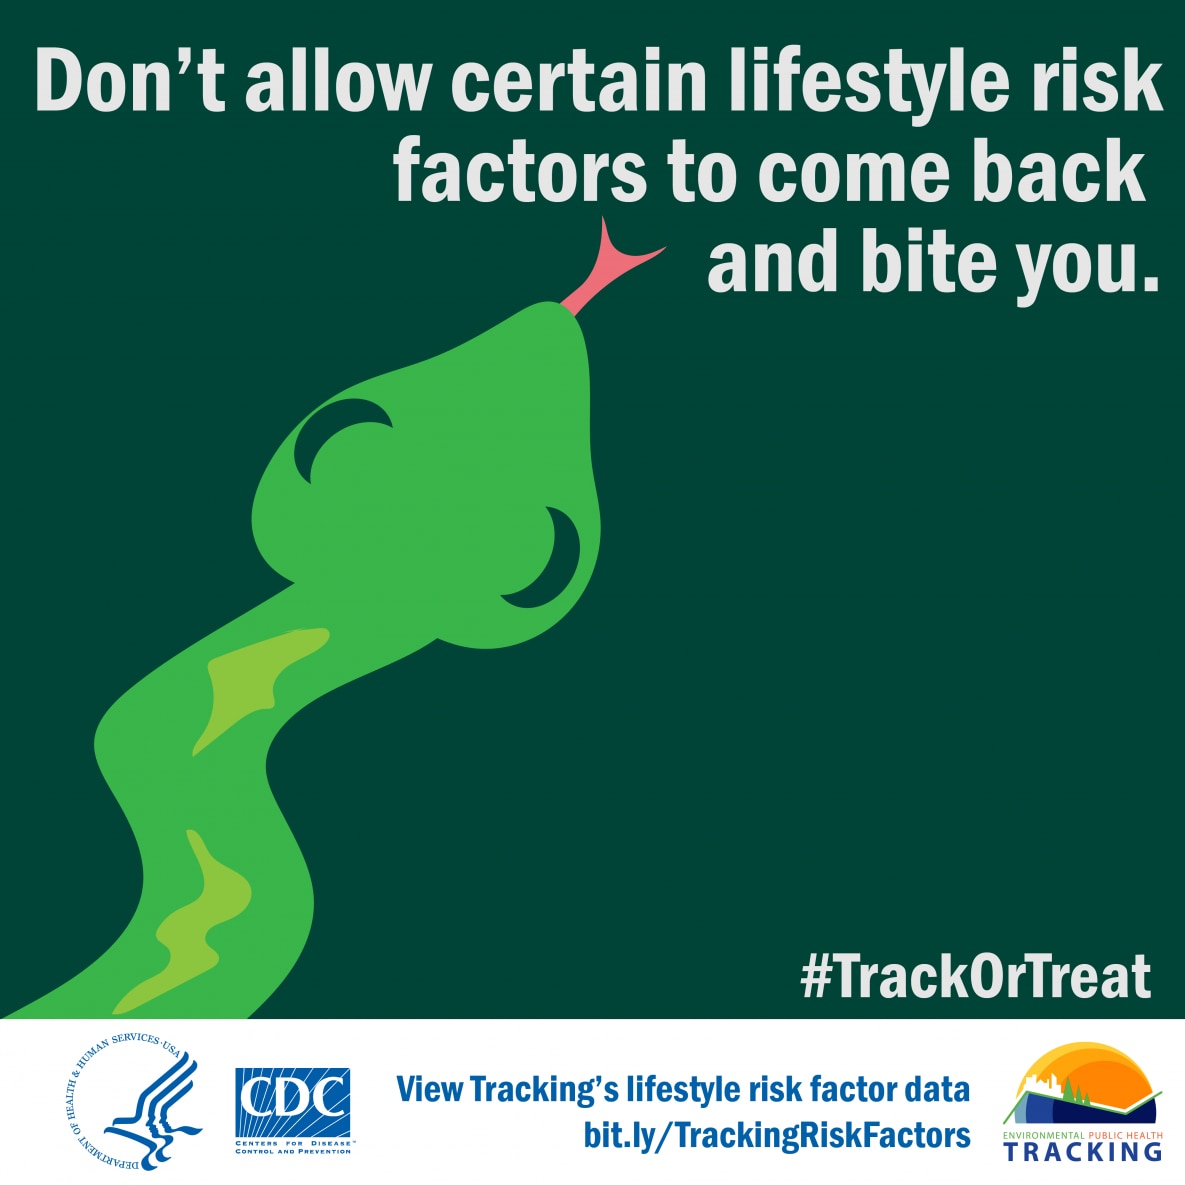 Green snake graphic with text: "Don’t allow certain lifestyle risk factors to come back and bite you."